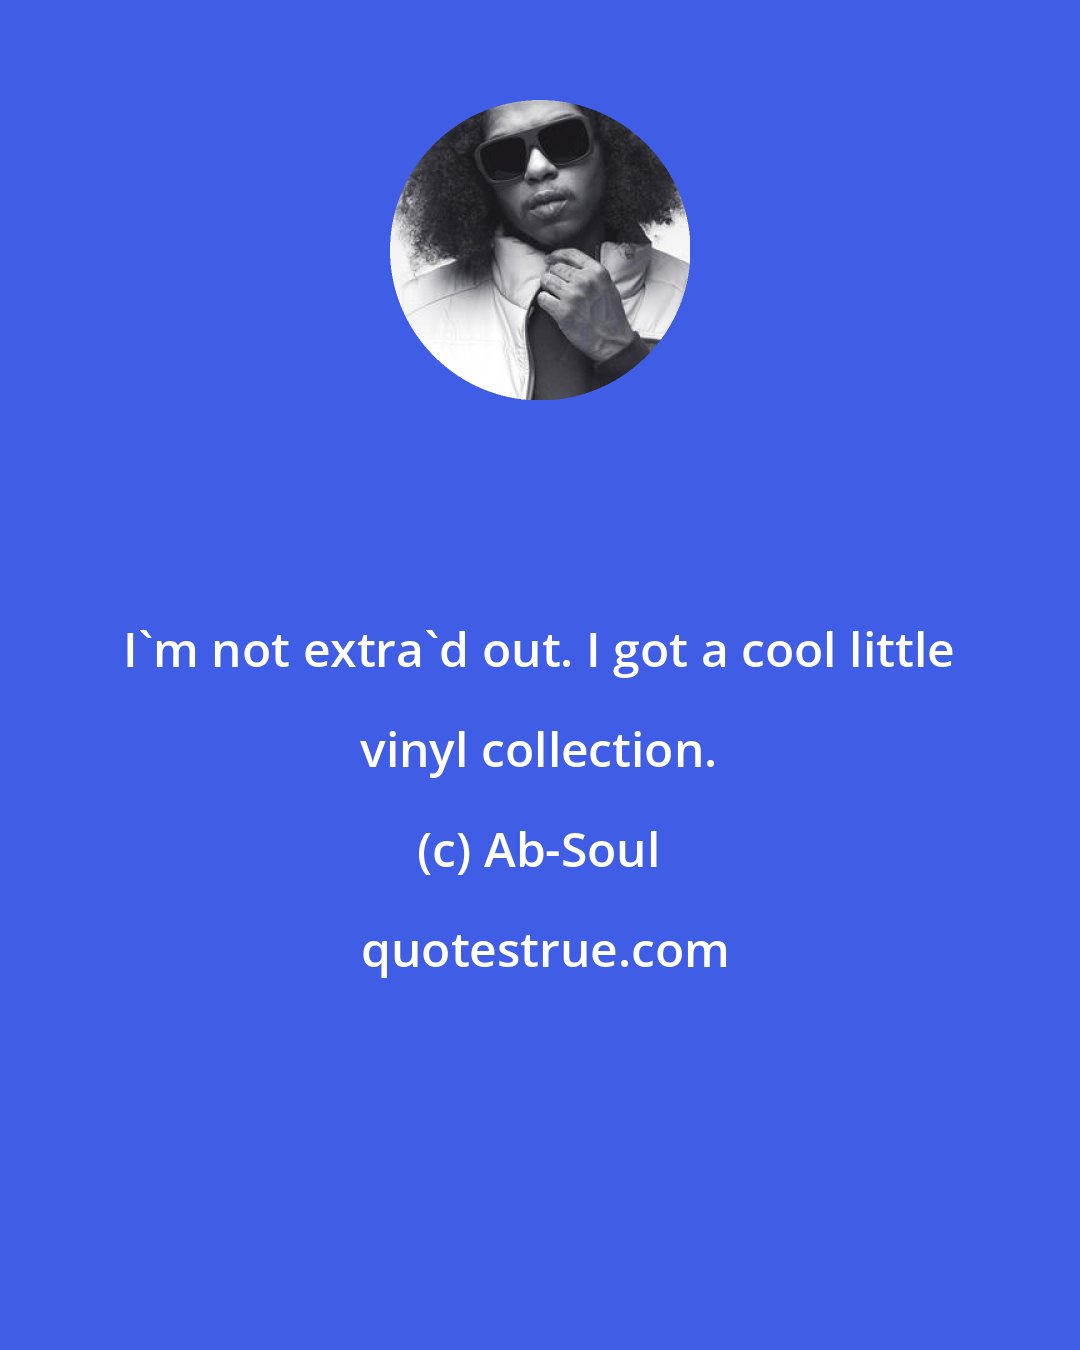 Ab-Soul: I'm not extra'd out. I got a cool little vinyl collection.